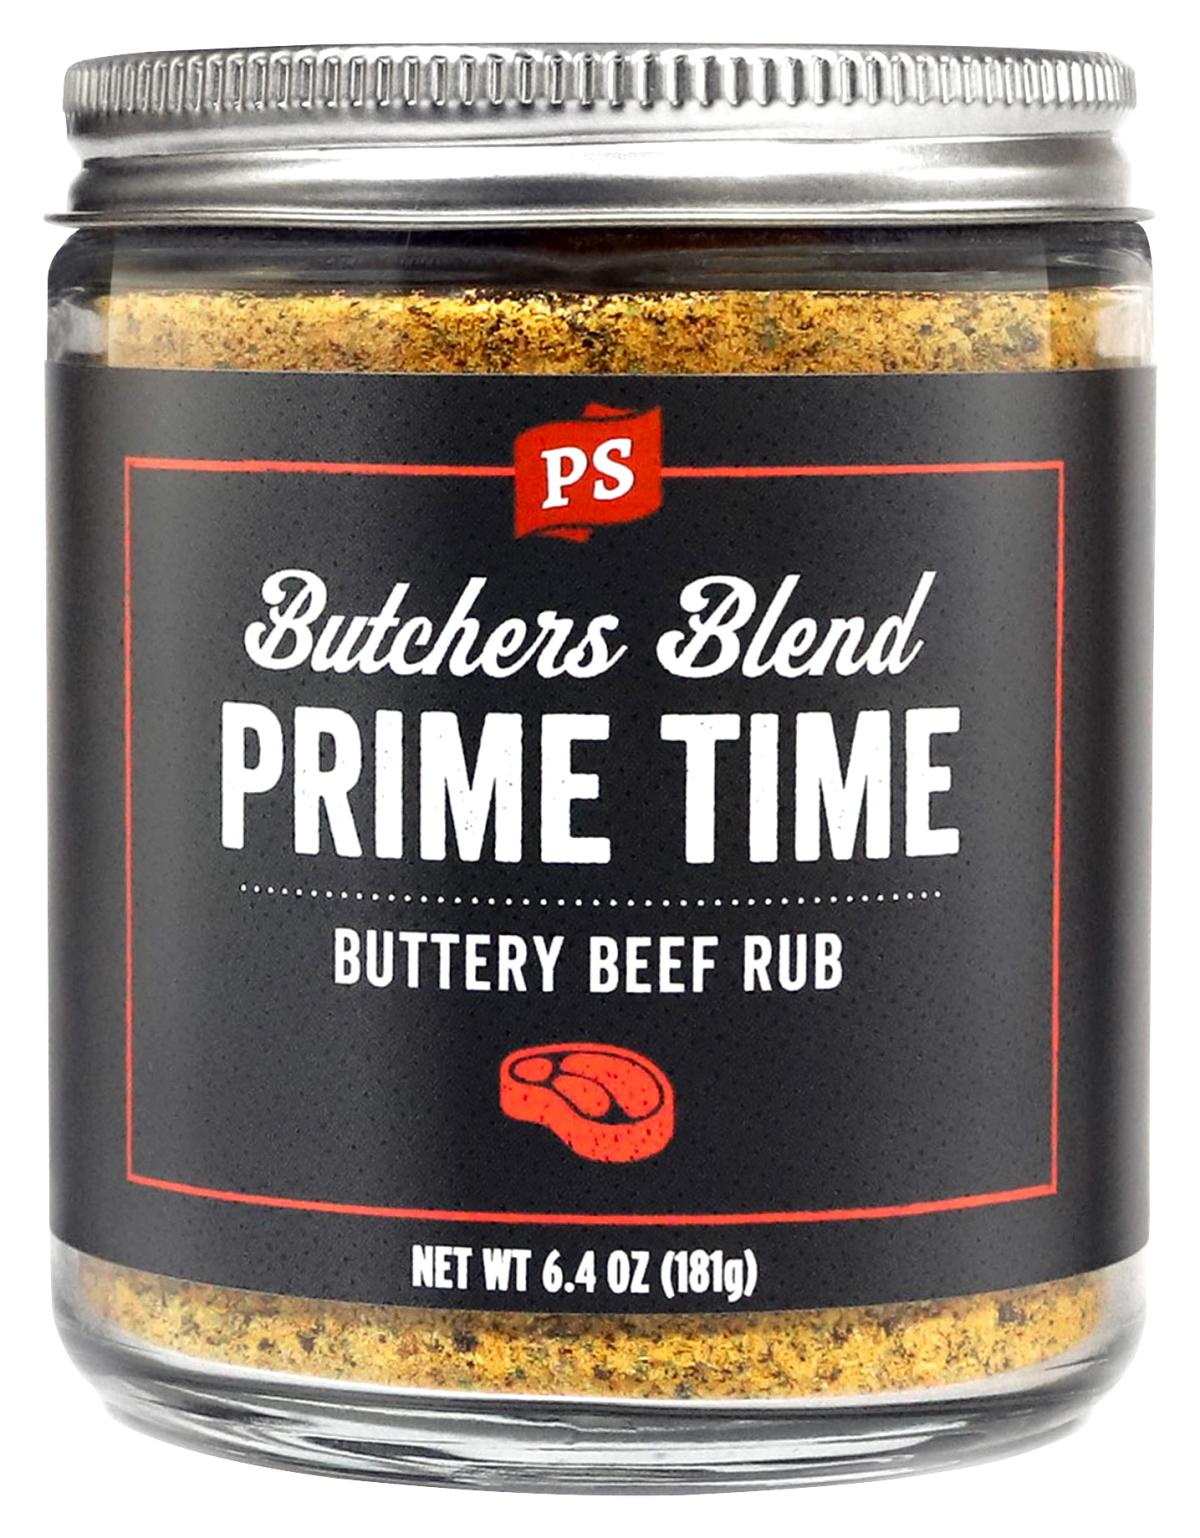 PS Seasoning Butchers Blend Prime Time Buttery Beef Rub - 6.4 oz.